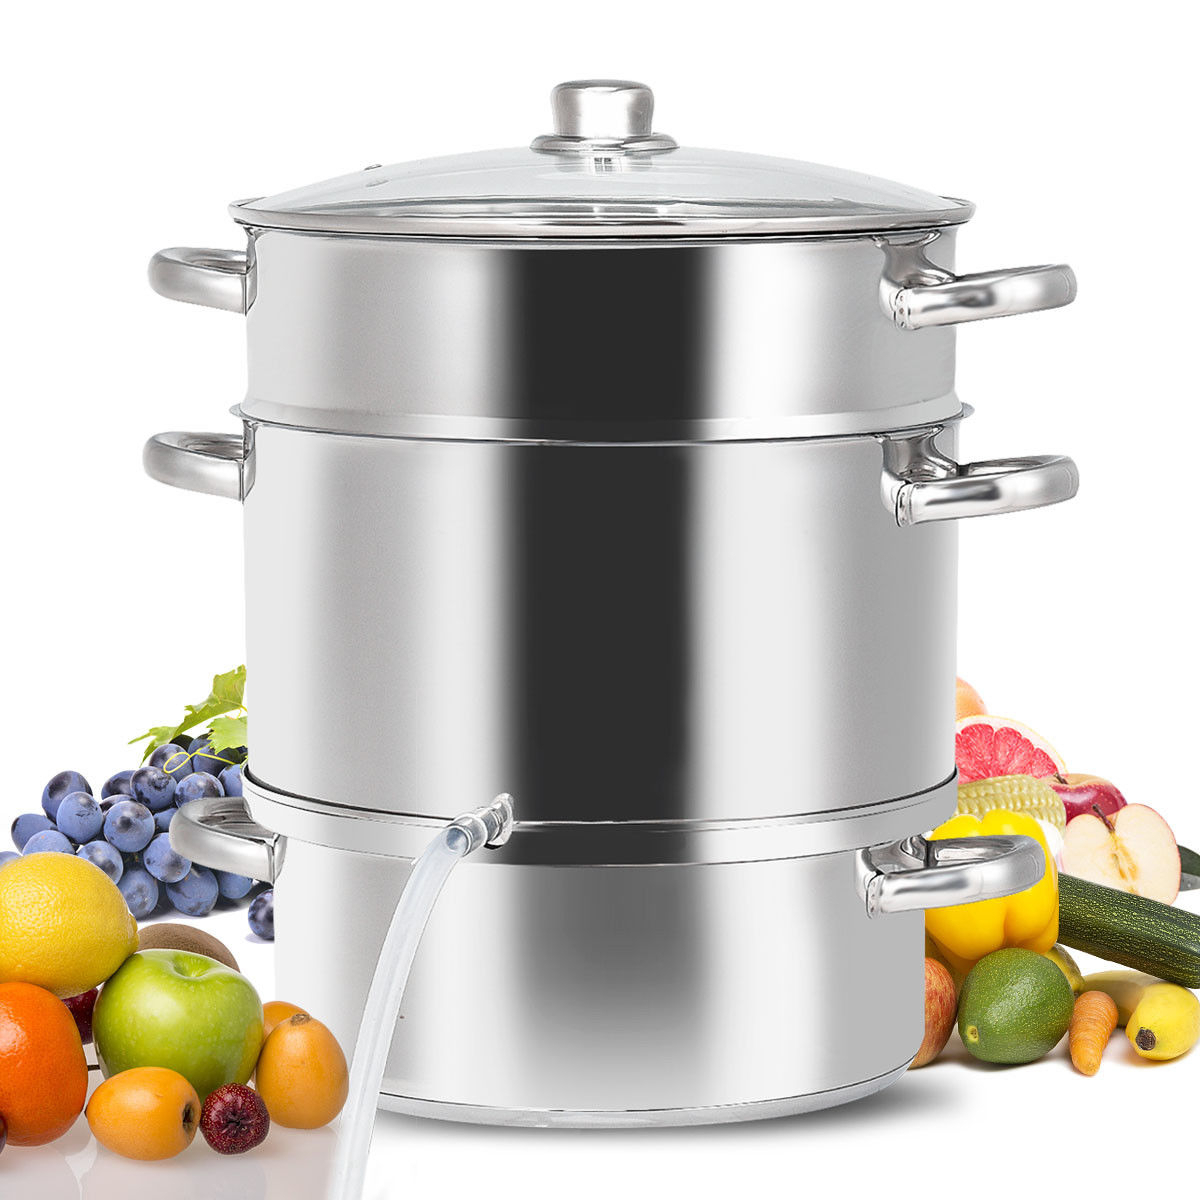 11-Quart Stainless Steel Fruit Juicer Steamer Stove Top W/ Tempered Glass Lid